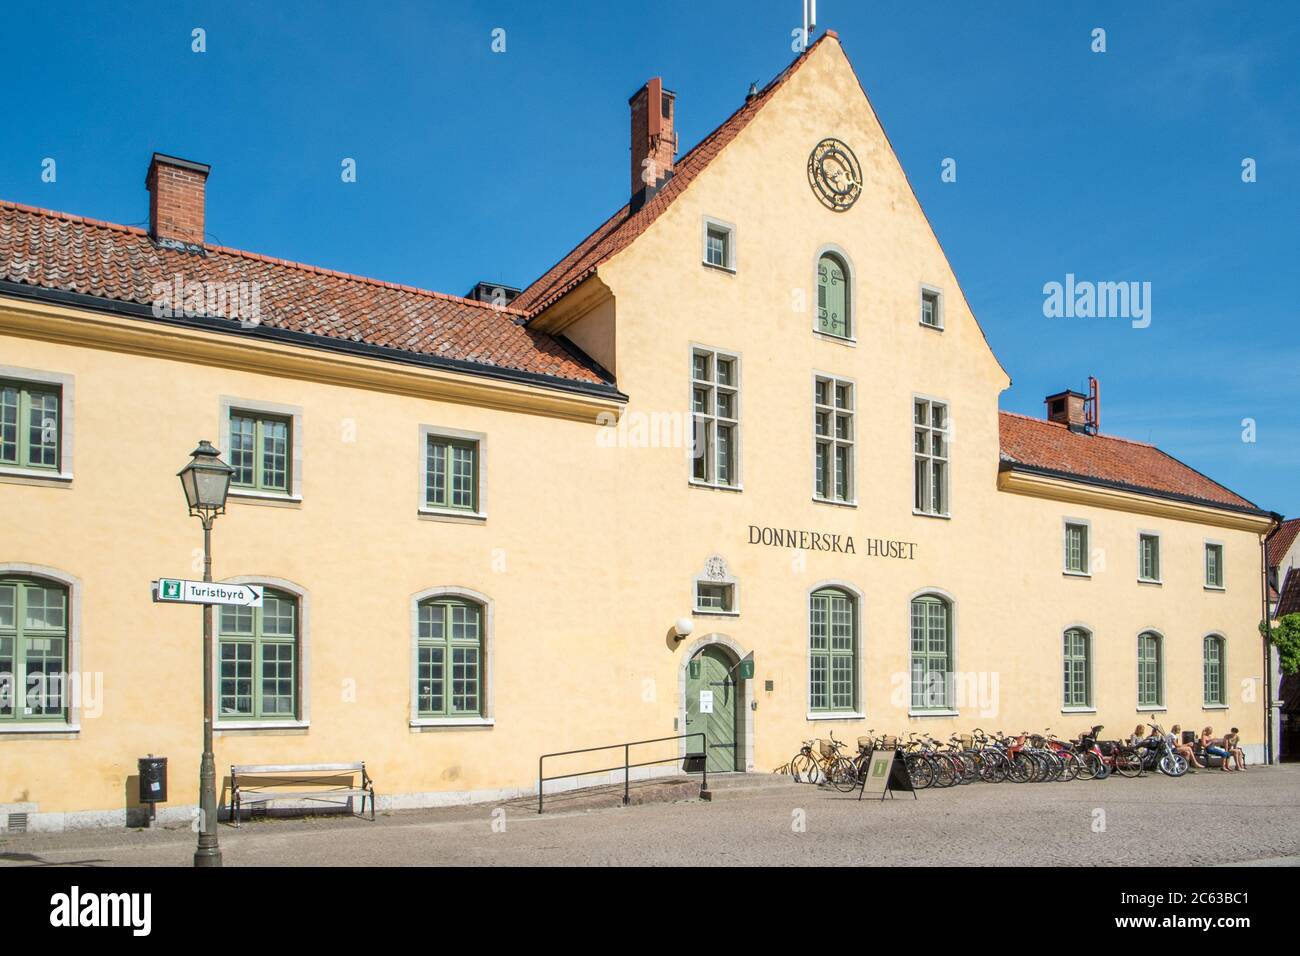 House of Donner in medieval Visby on Swedish Baltic sea island Gotland was built in the 12th century. It has been a trading house and post office. Stock Photo